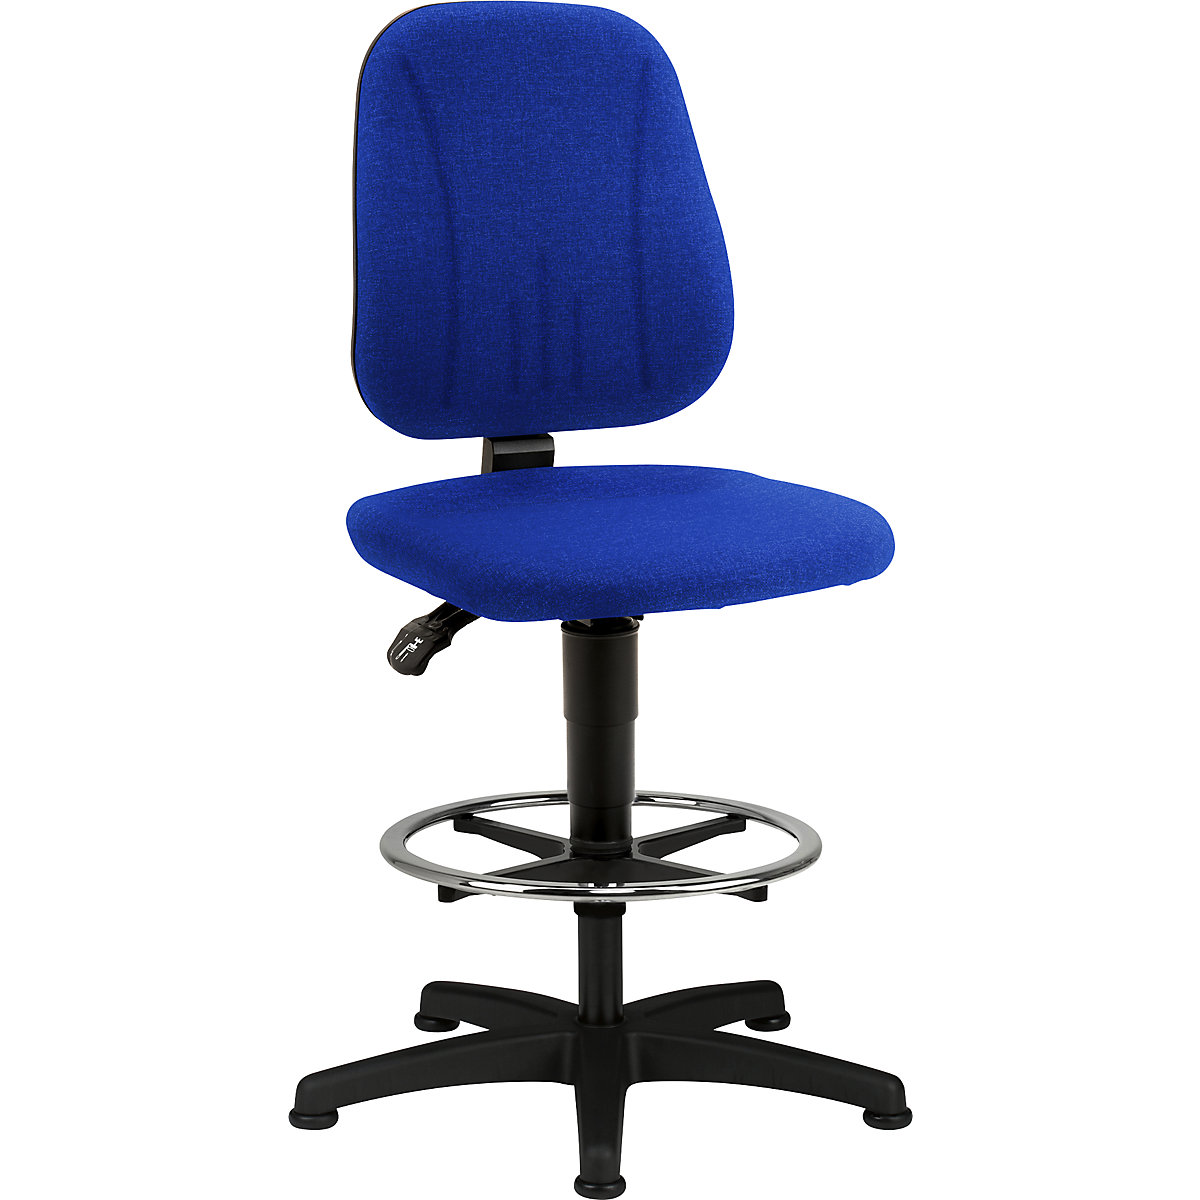 Industrial swivel chair – bimos, with gas lift height adjustment, fabric cover, blue, with floor glides and foot ring-10